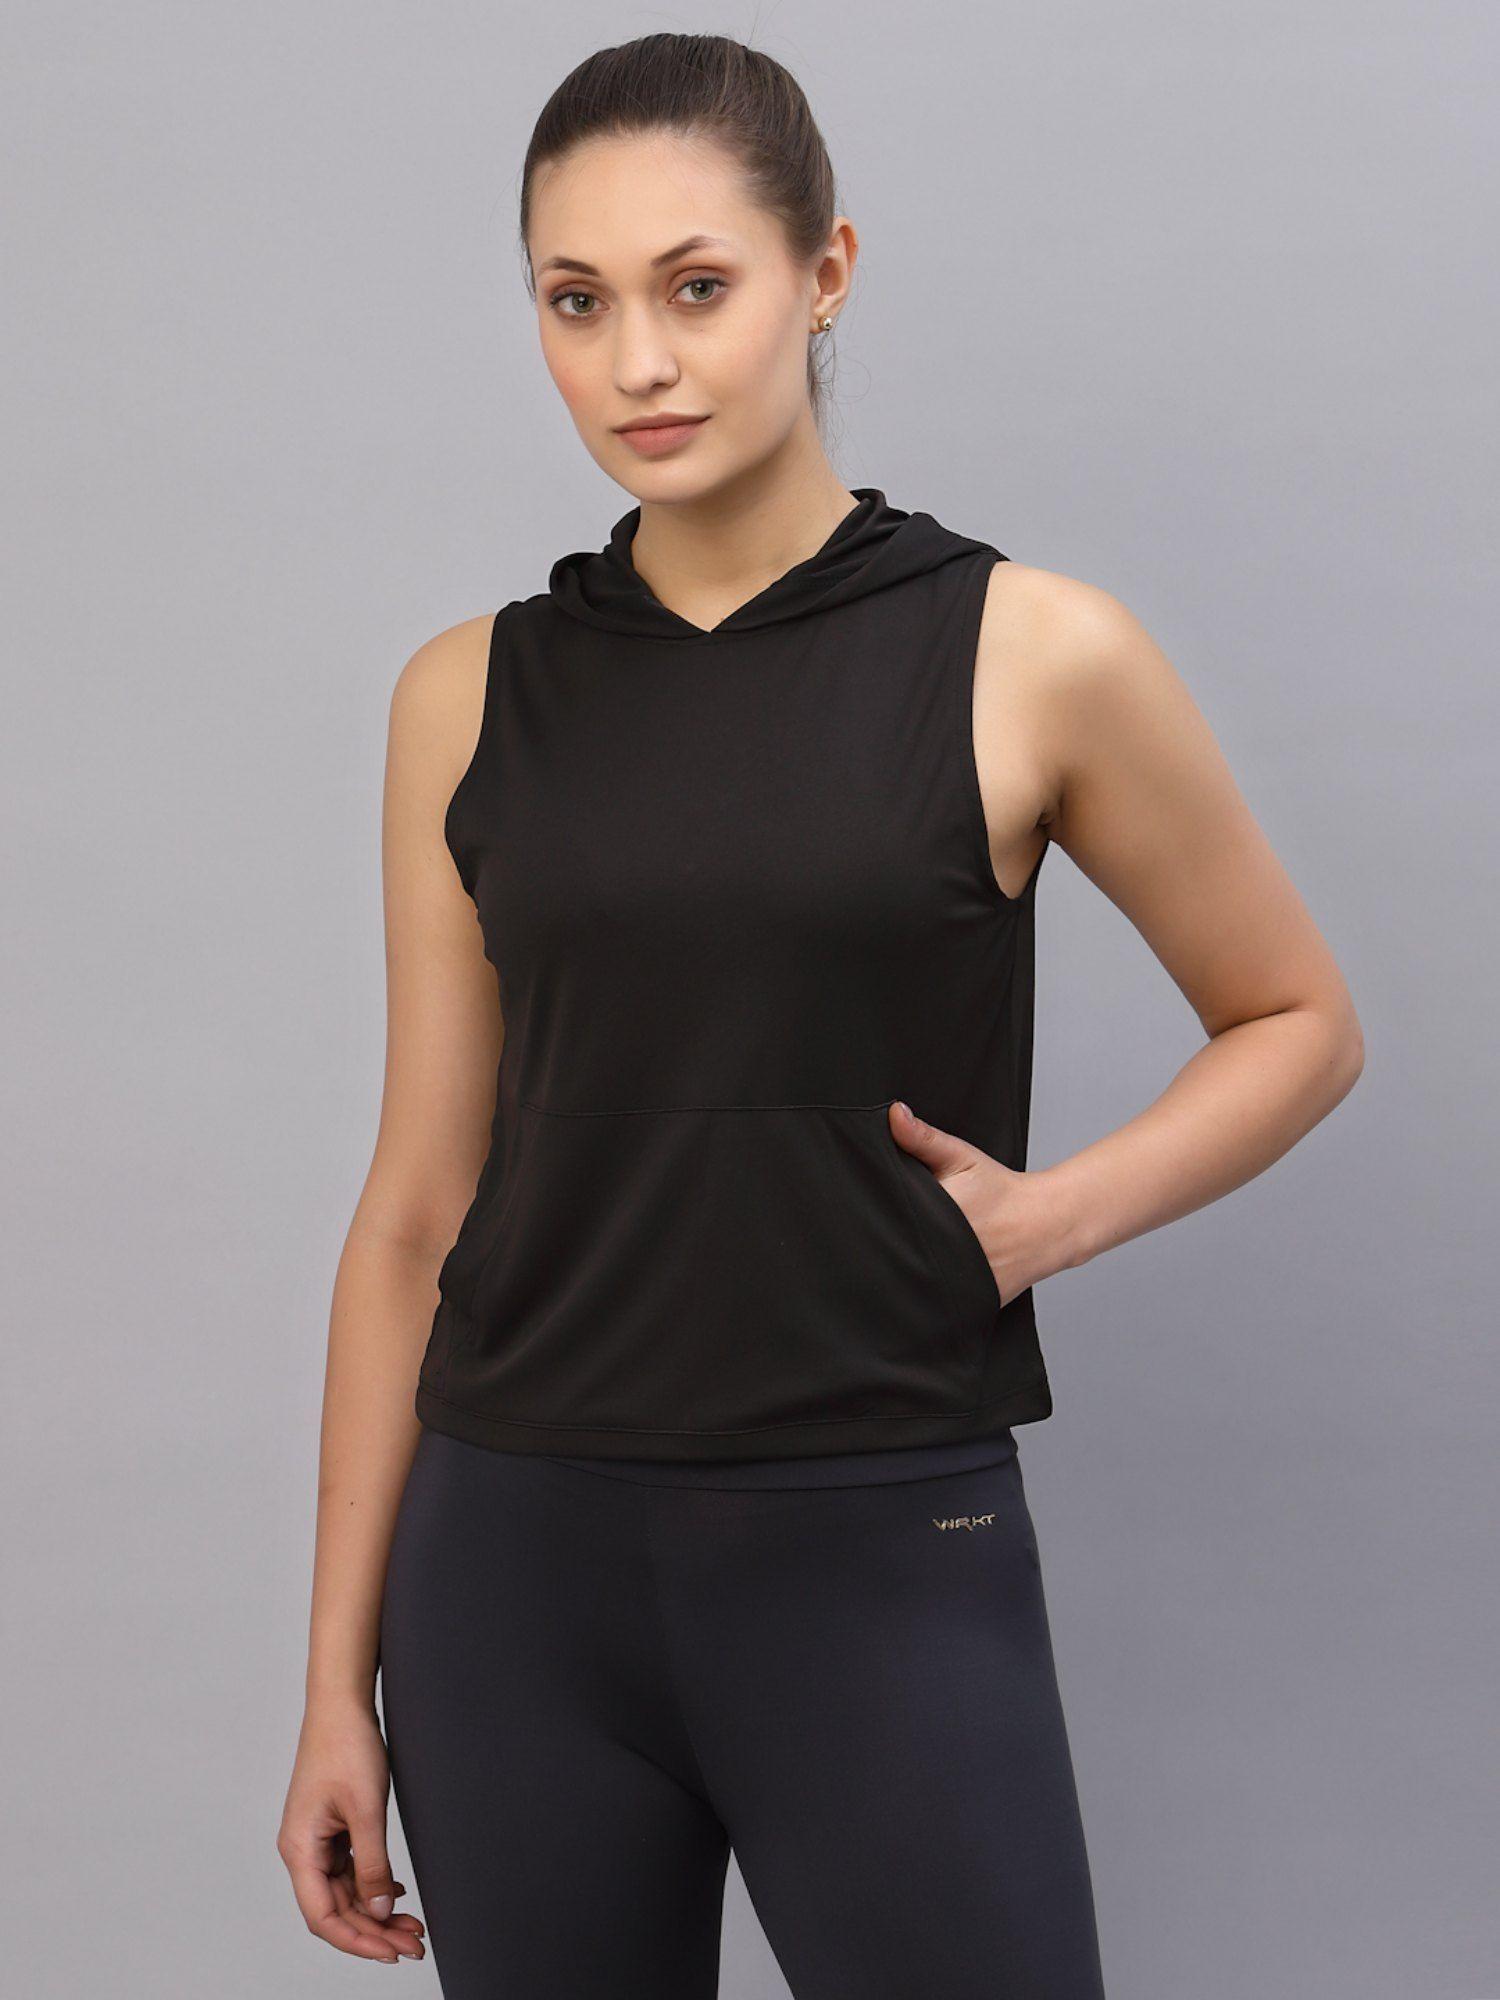 women black hooded with sleeveless activewear t-shirt